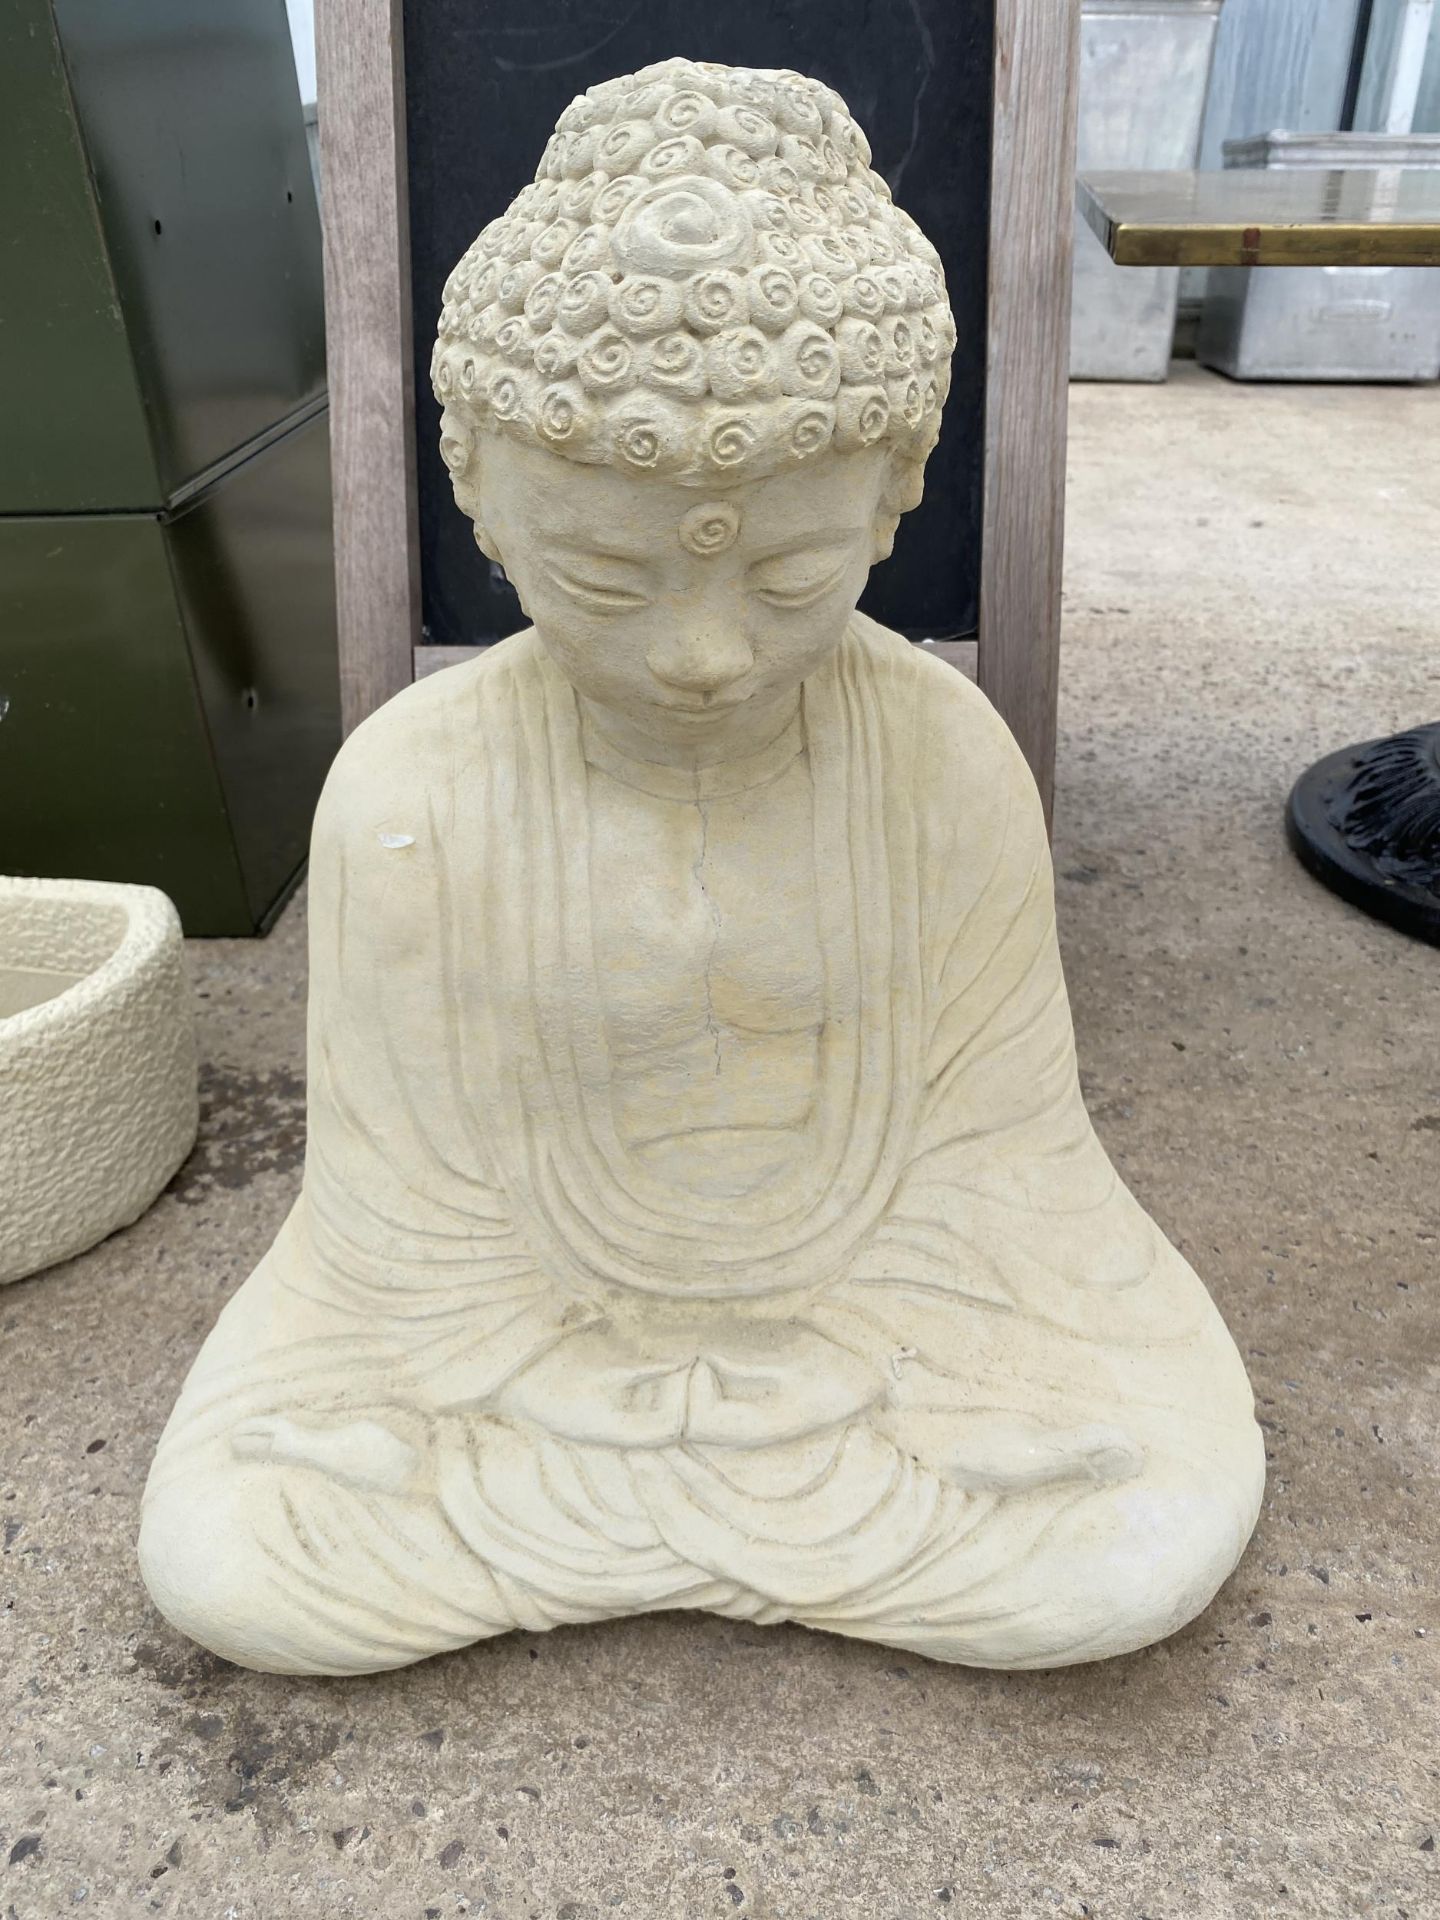 AN AS NEW EX DISPLAY CONCRETE BUDDAH FIGURE *PLEASE NOTE VAT TO BE PAID ON THIS ITEM*